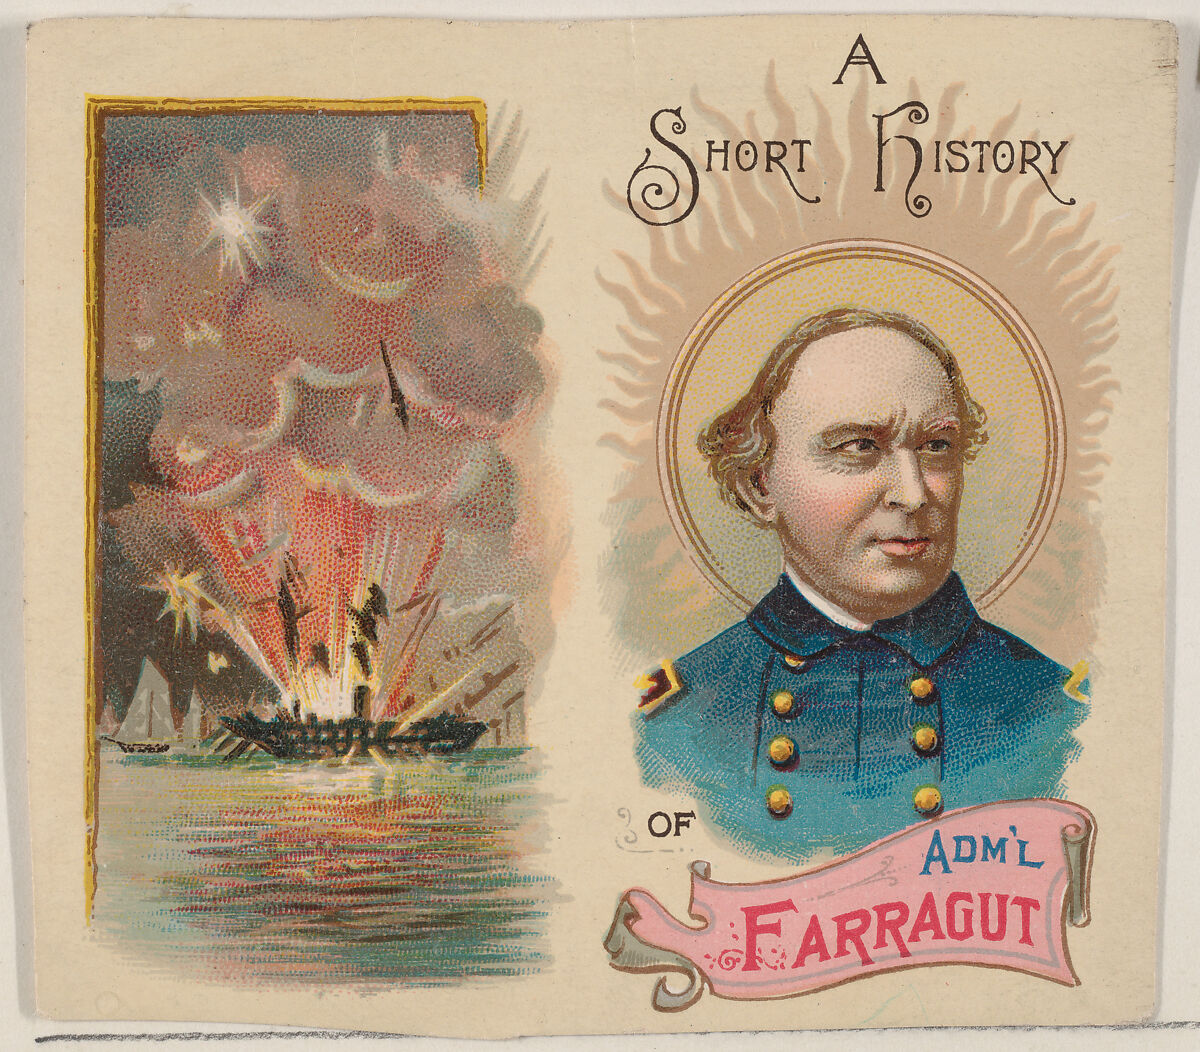 A Short History of Admiral Farragut, one-sheet of cover and verso from the Histories of Generals series of booklets (N78) for Duke brand cigarettes, Issued by W. Duke, Sons &amp; Co. (New York and Durham, N.C.), Commercial color lithograph 